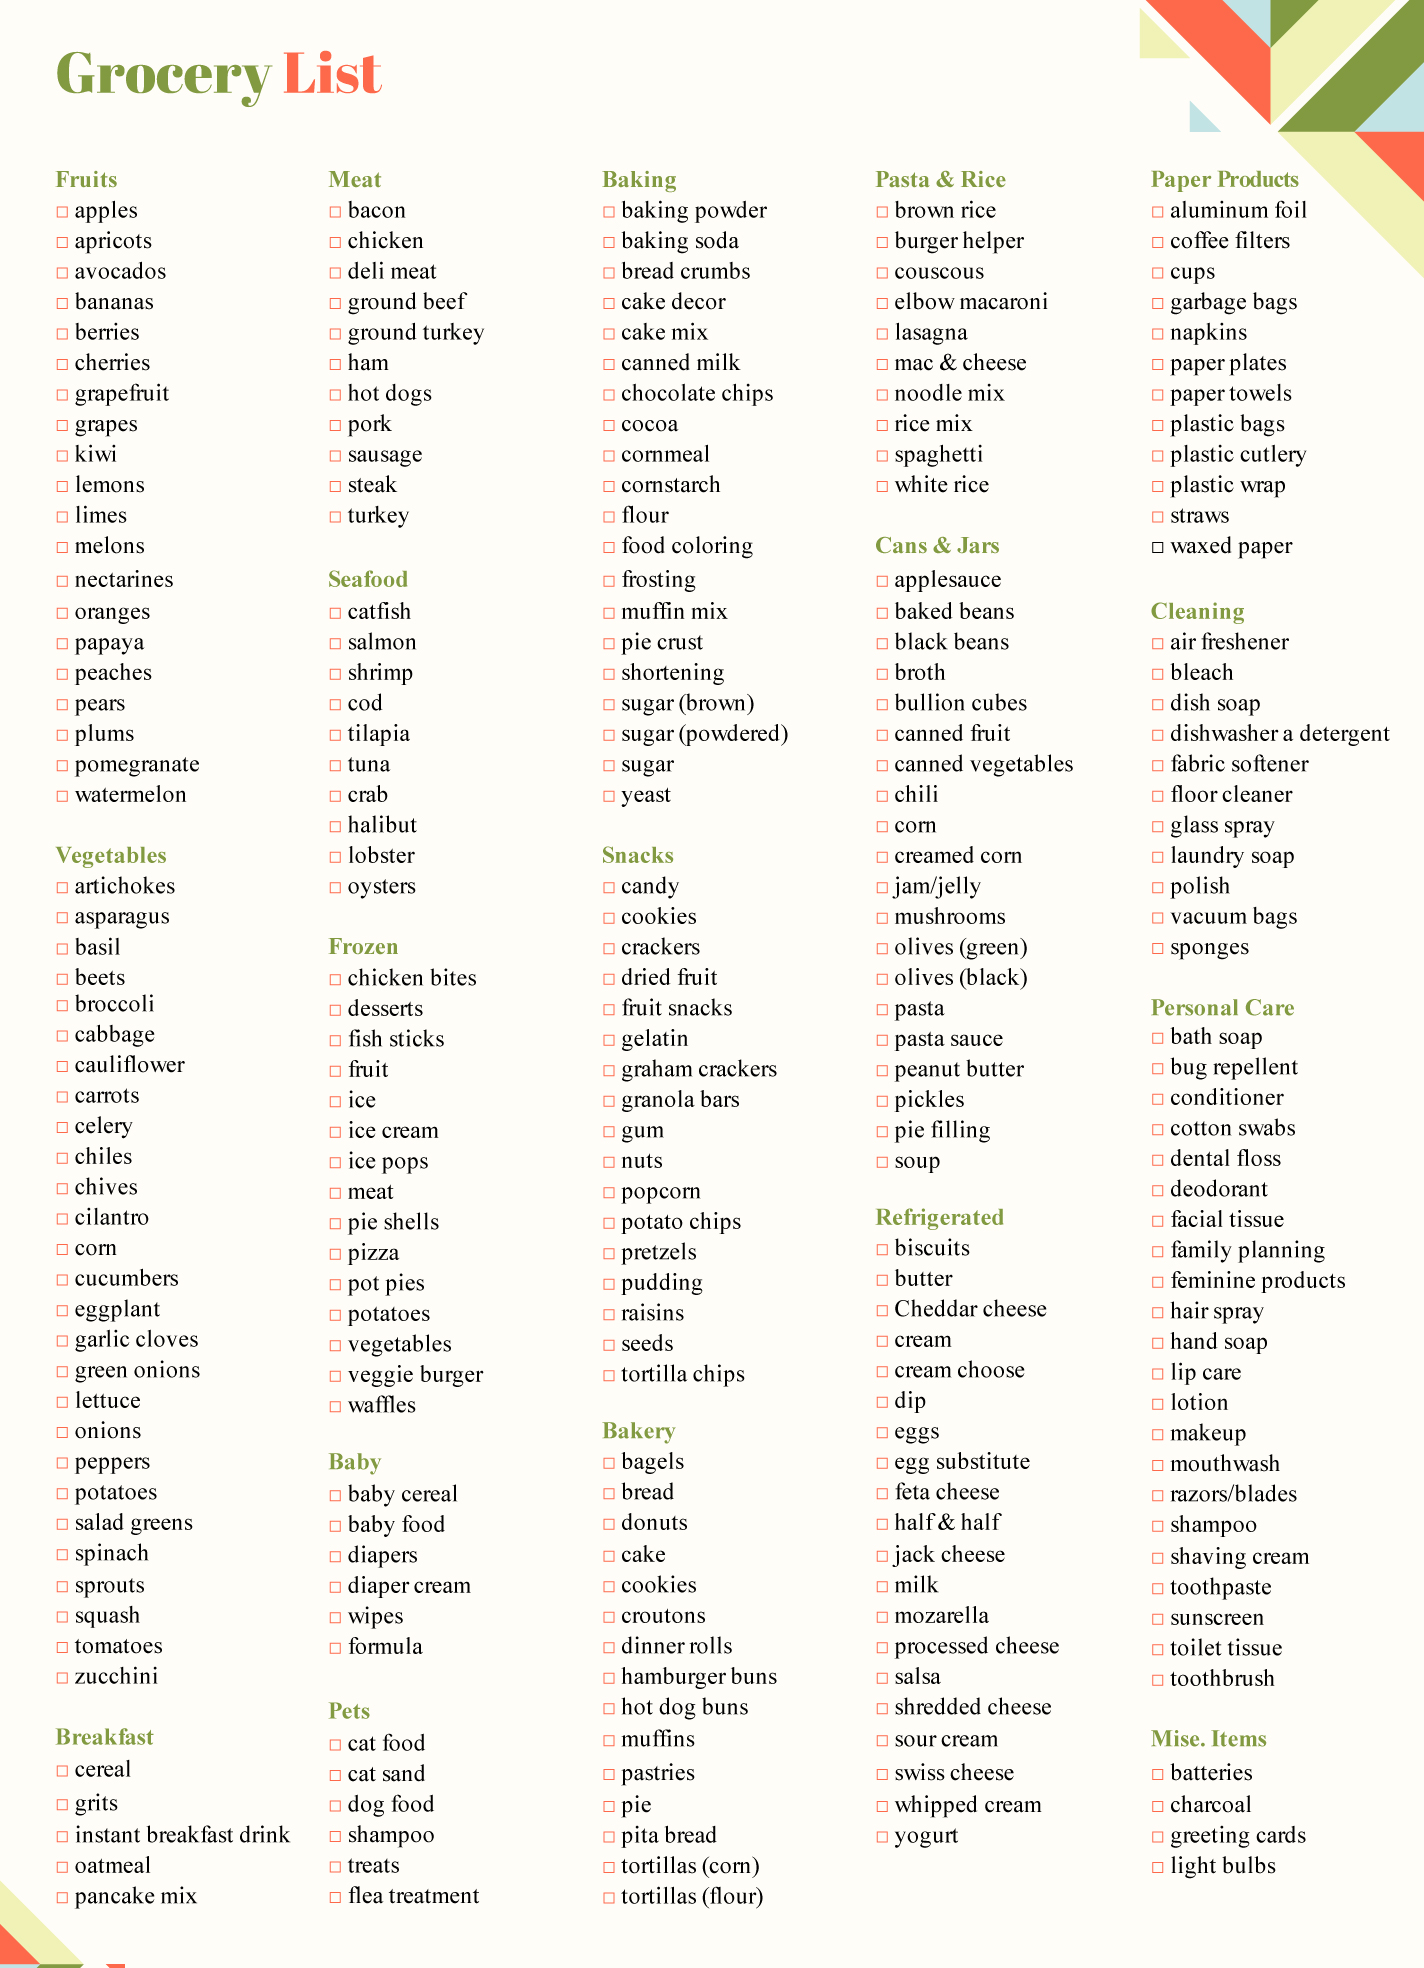 Master Grocery List Free Google Docs Template 